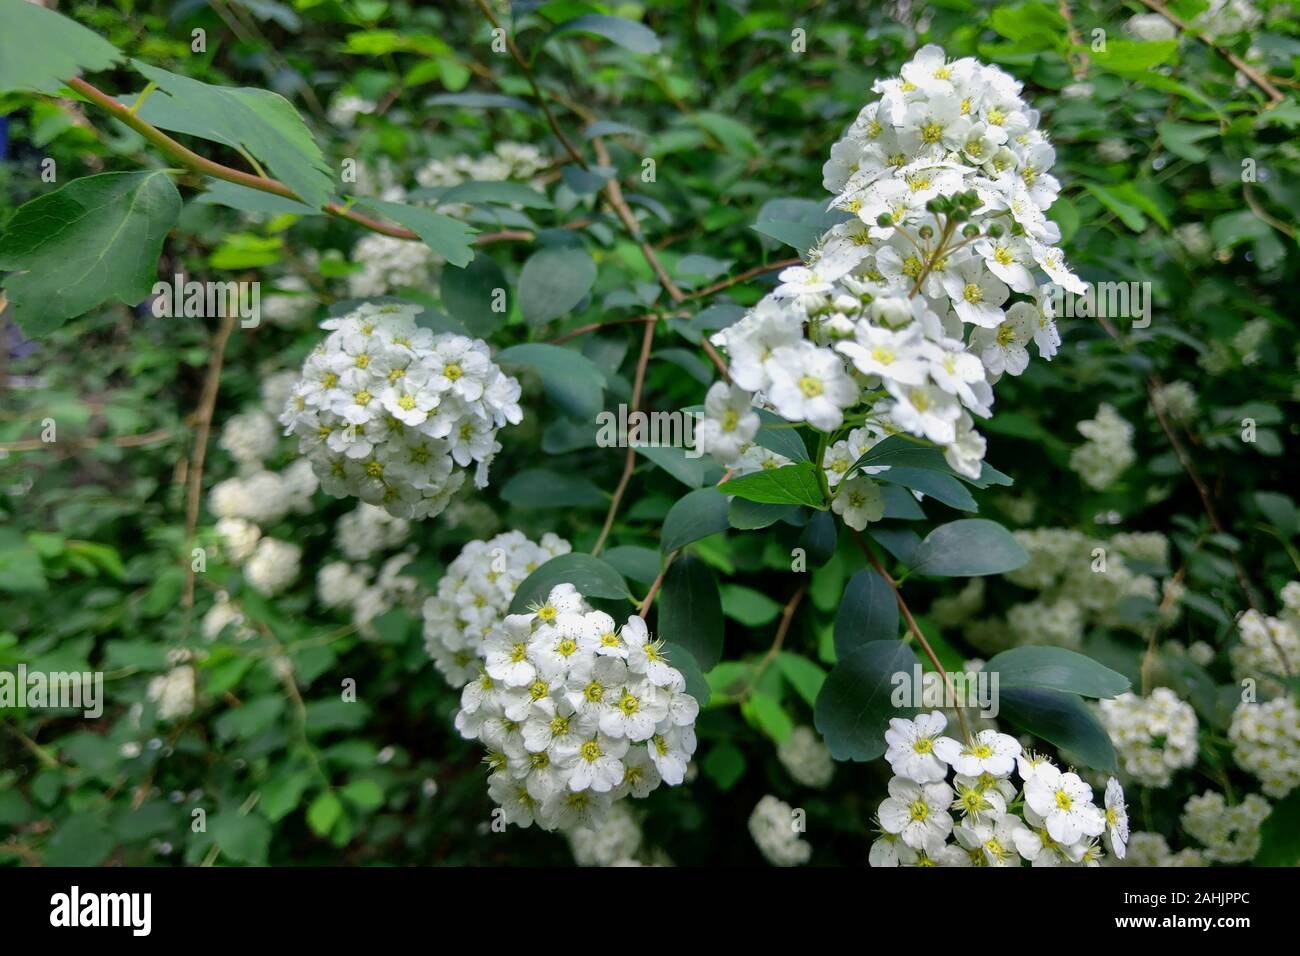 White flowers and green leaf of common lantana plant Stock Photo